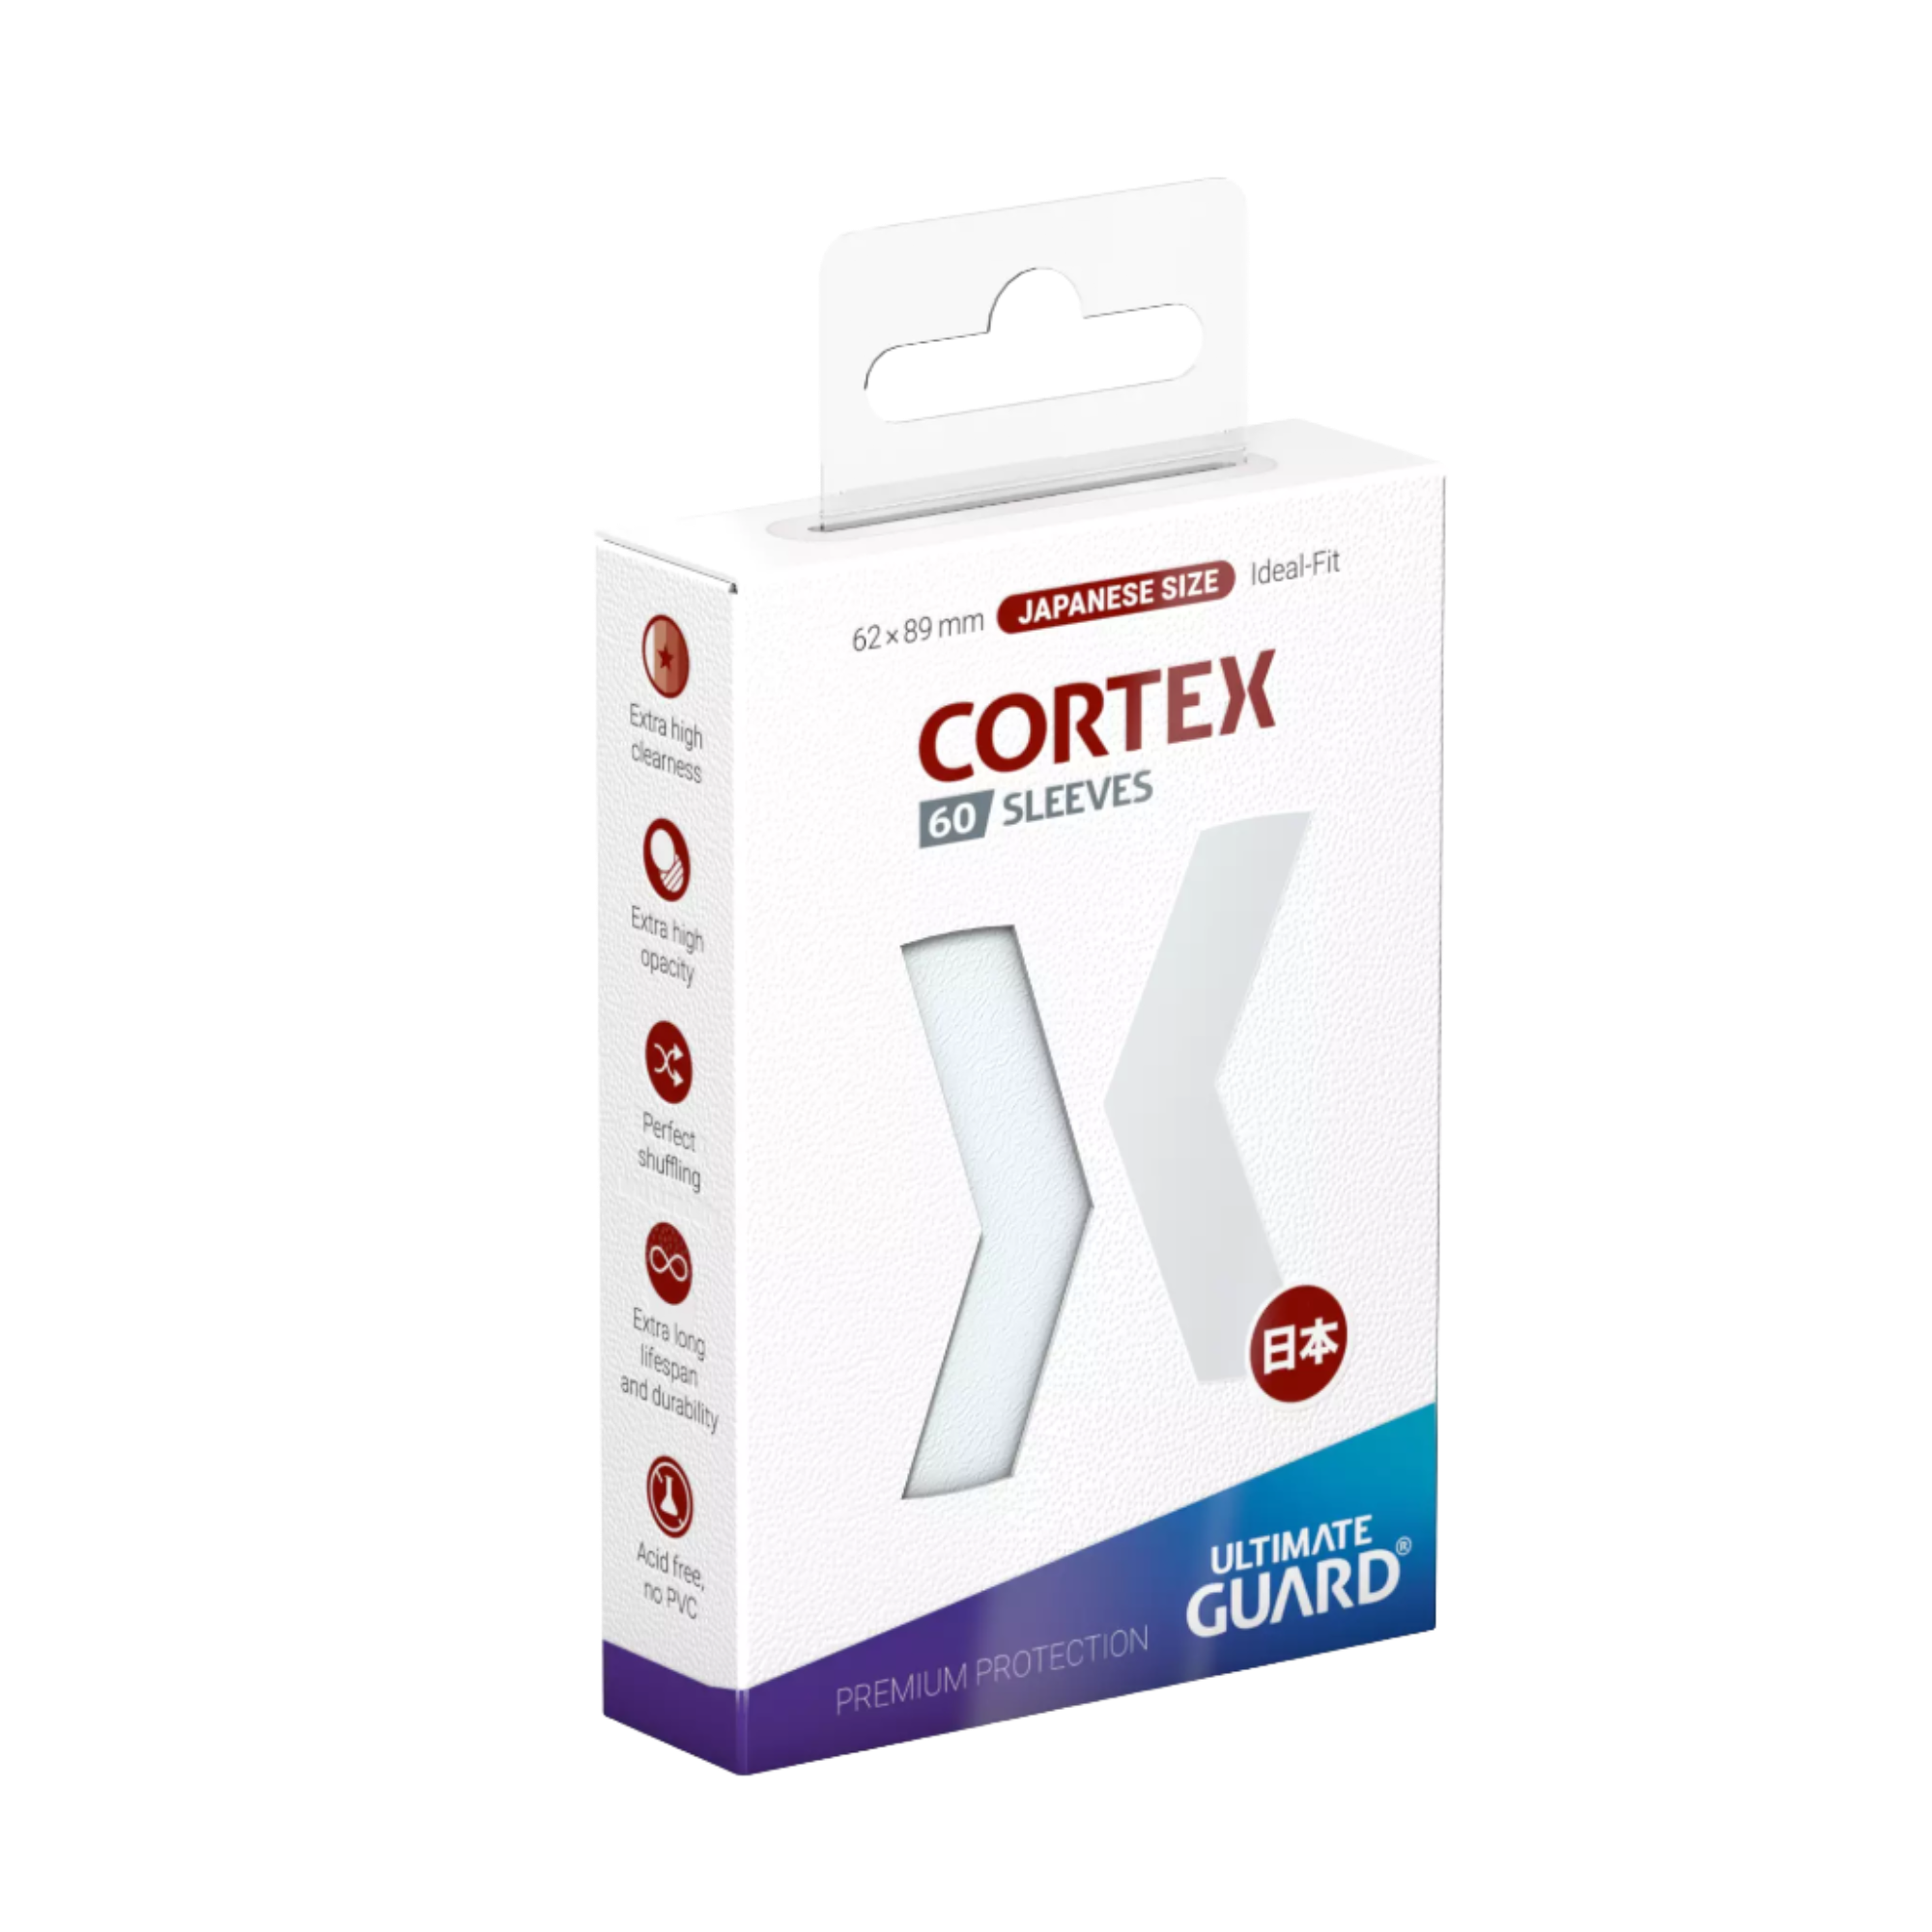 Ultimate Guard - Cortex Sleeves - Japanese Size - Ideal-Fit - Transparent - 60pk